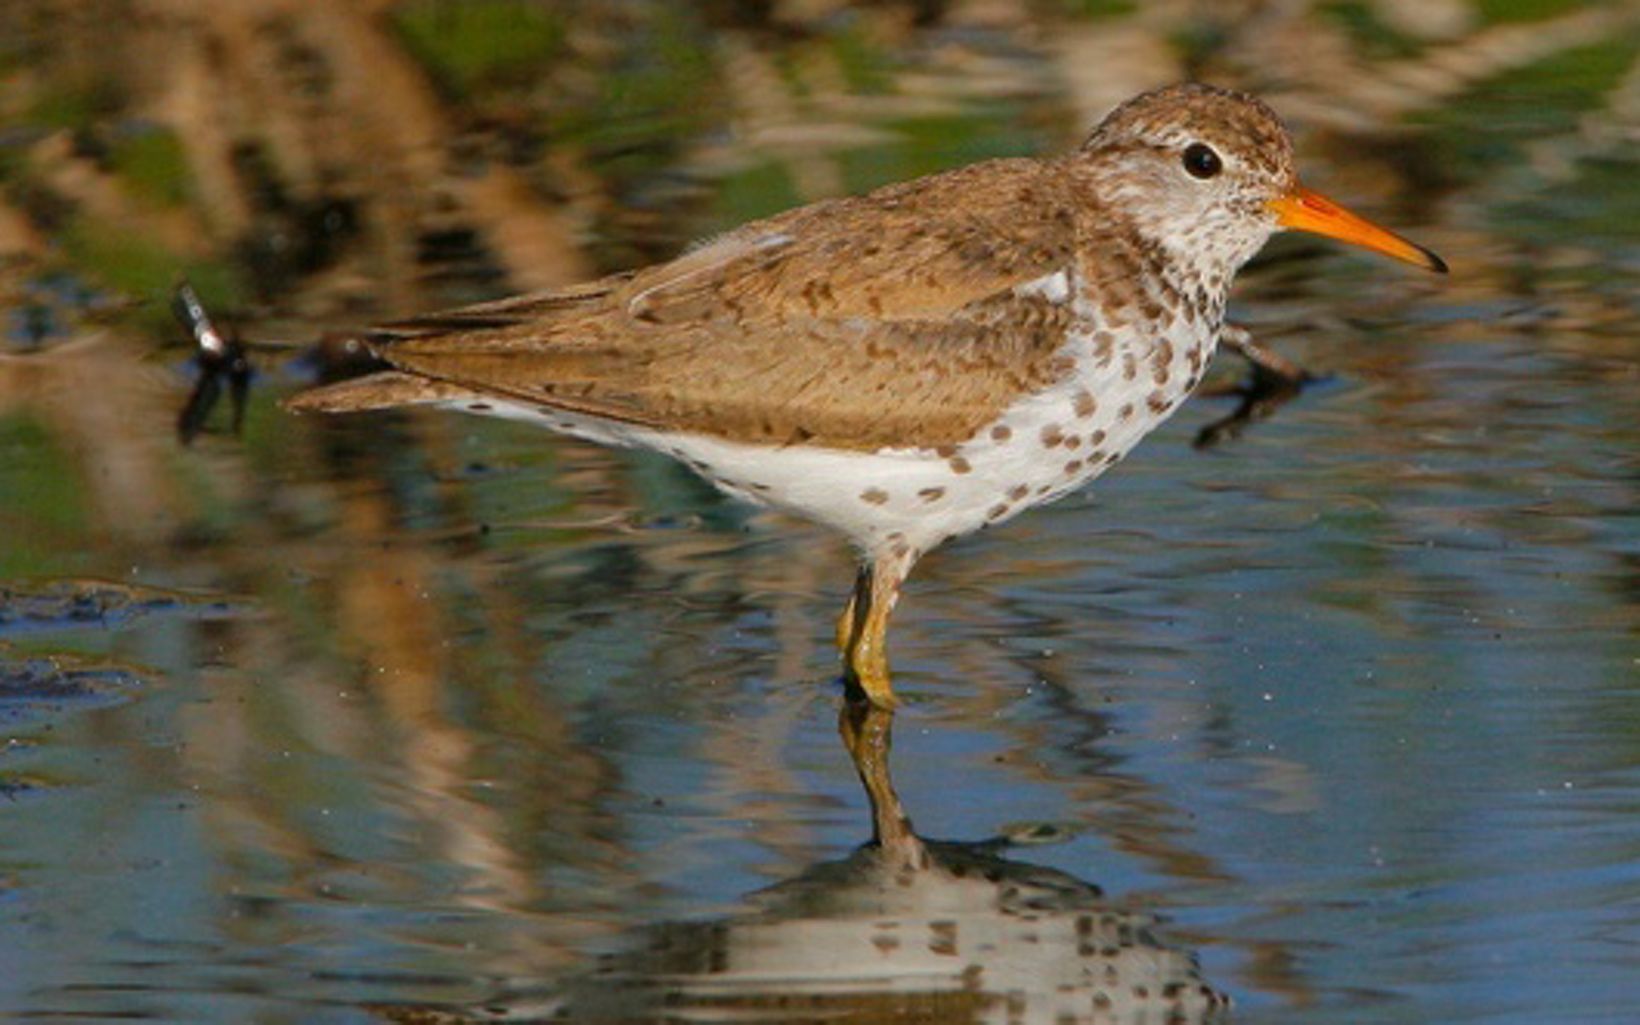 A brown and white sandpiper stands in a pool of water.